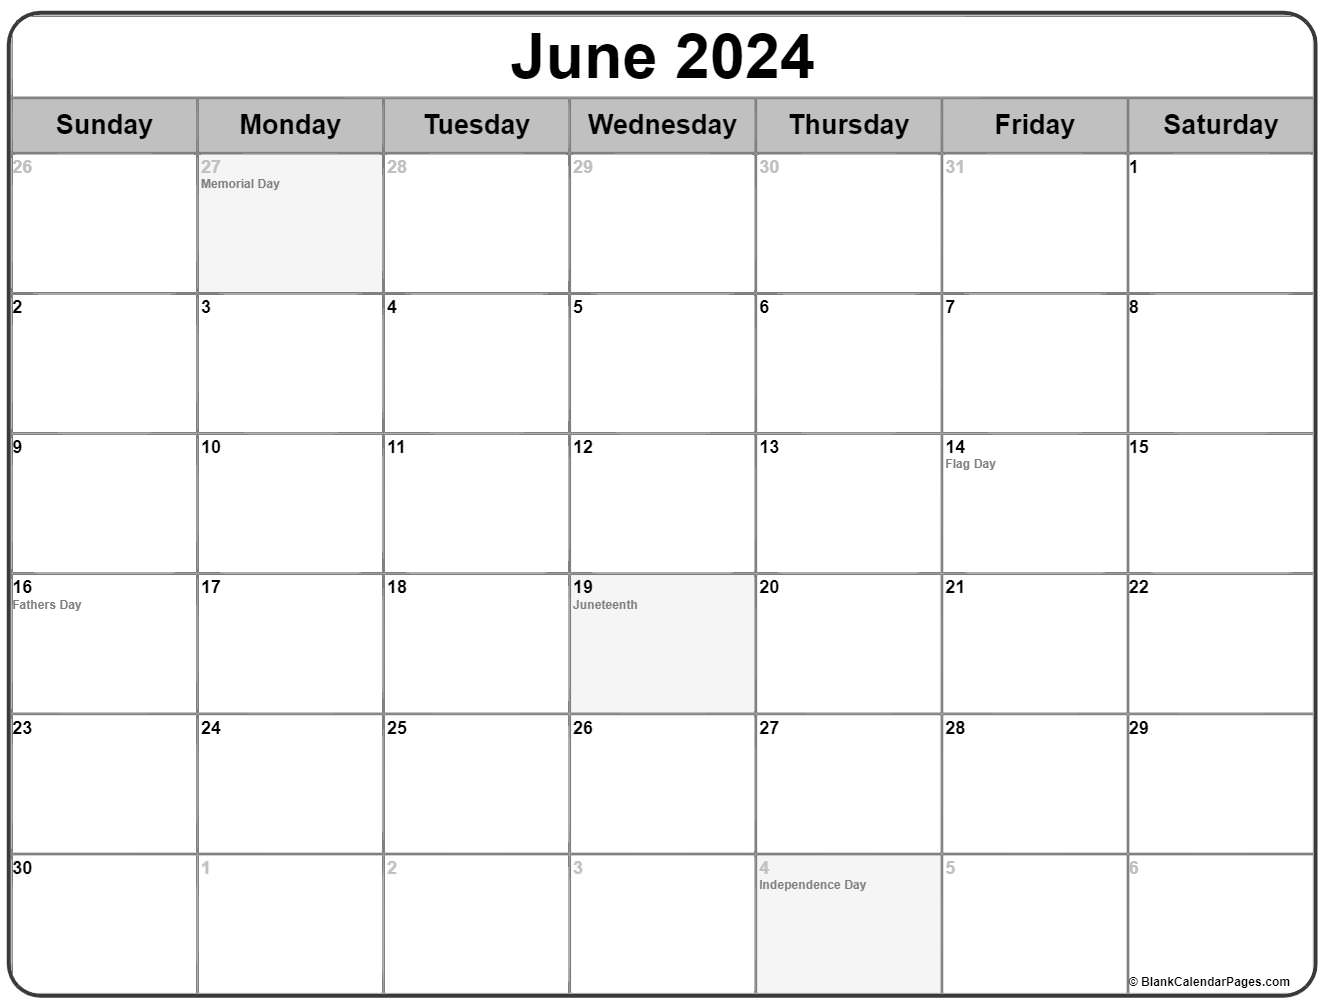 Collection of June 2020 calendars with holidays1571 x 1185